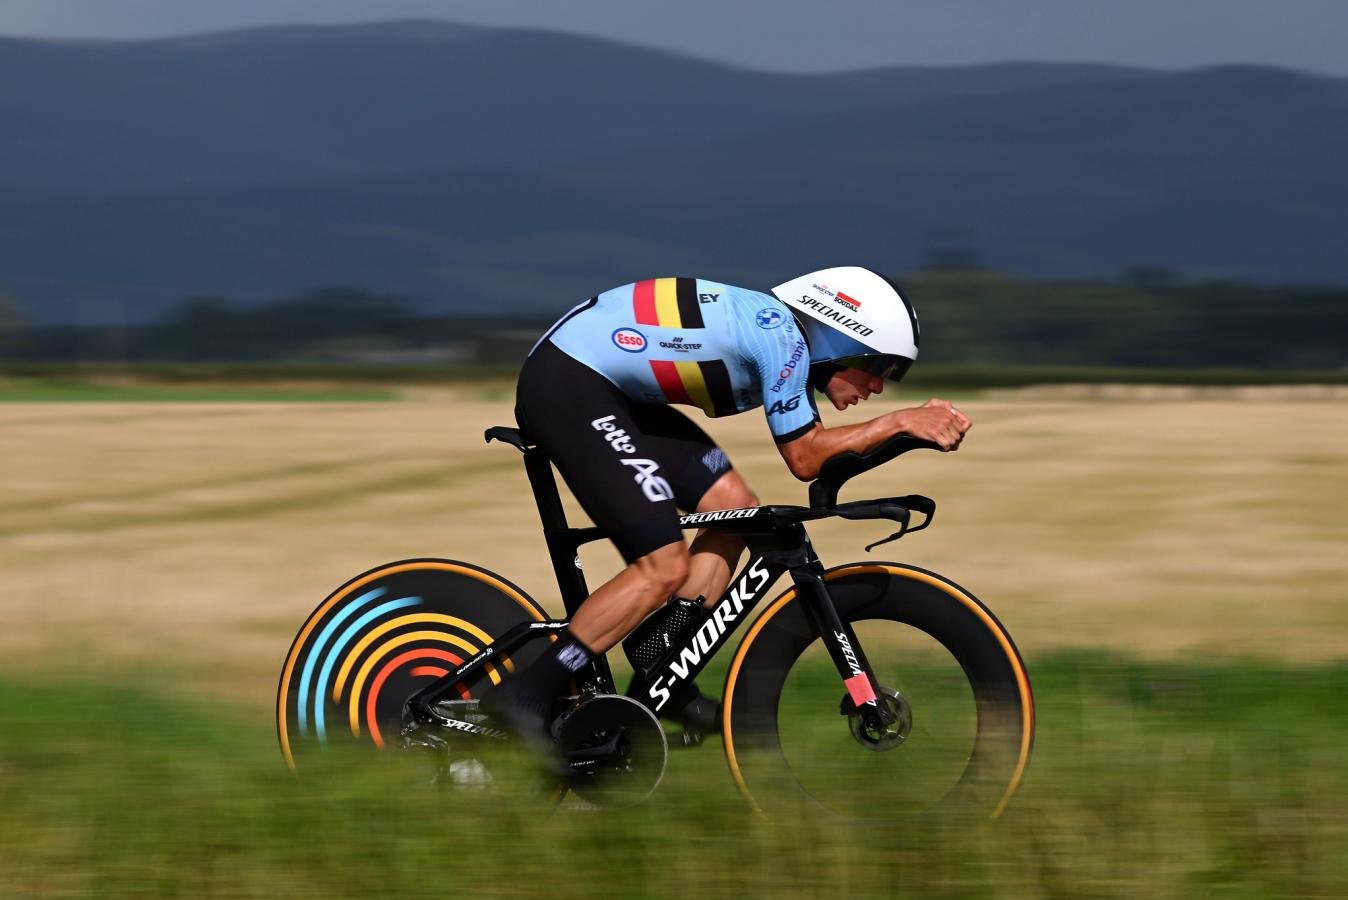 Remco Evenepoel's TT position has been a result of countless hours of testing and development, something not attainable by all teams. 